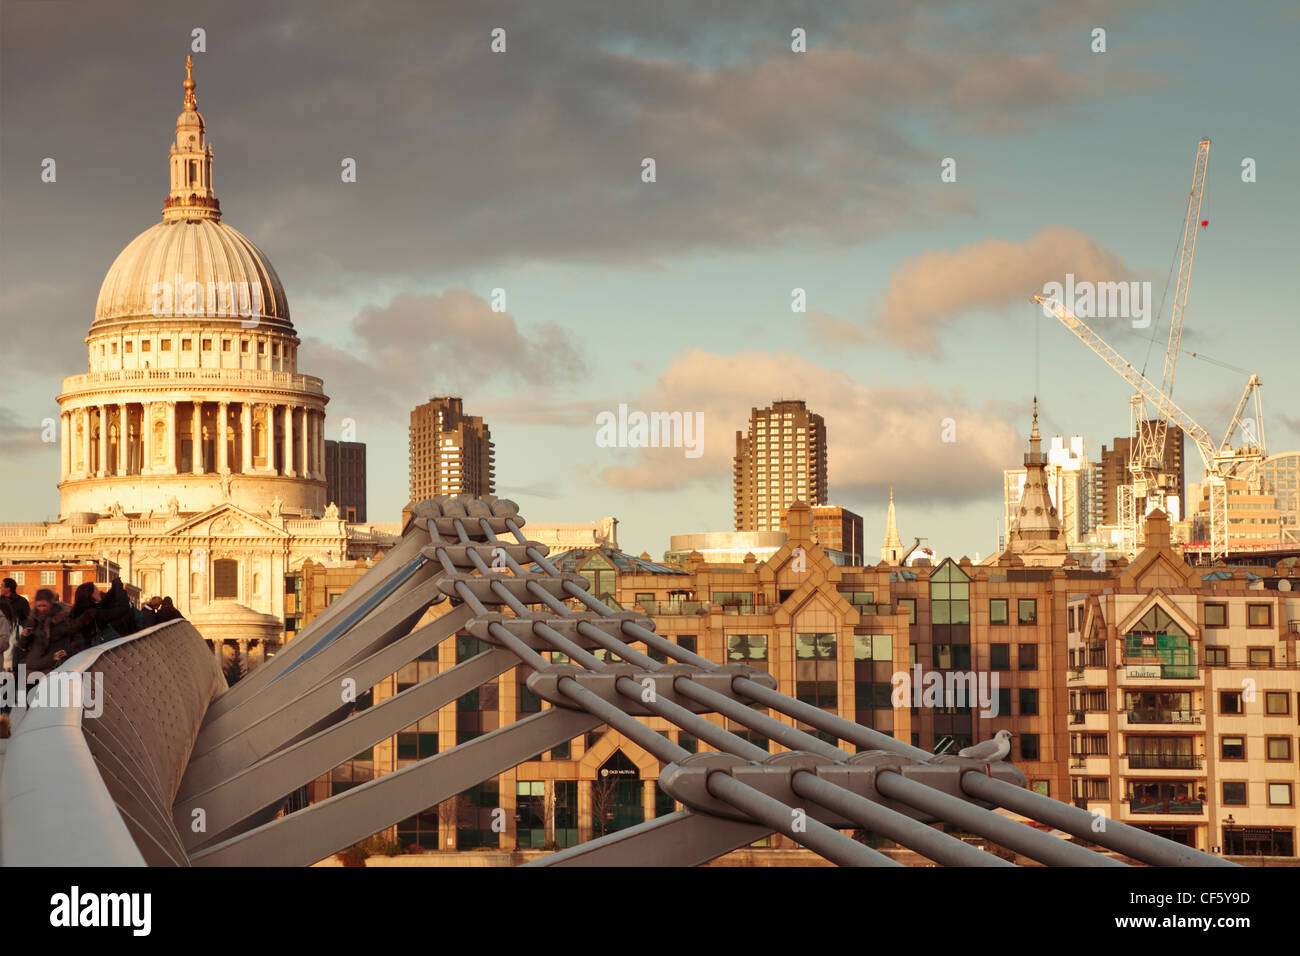 St Paul's Cathedral and the London Millennium Footbridge, crossing the River Thames to link Bankside with the City of London. Stock Photo